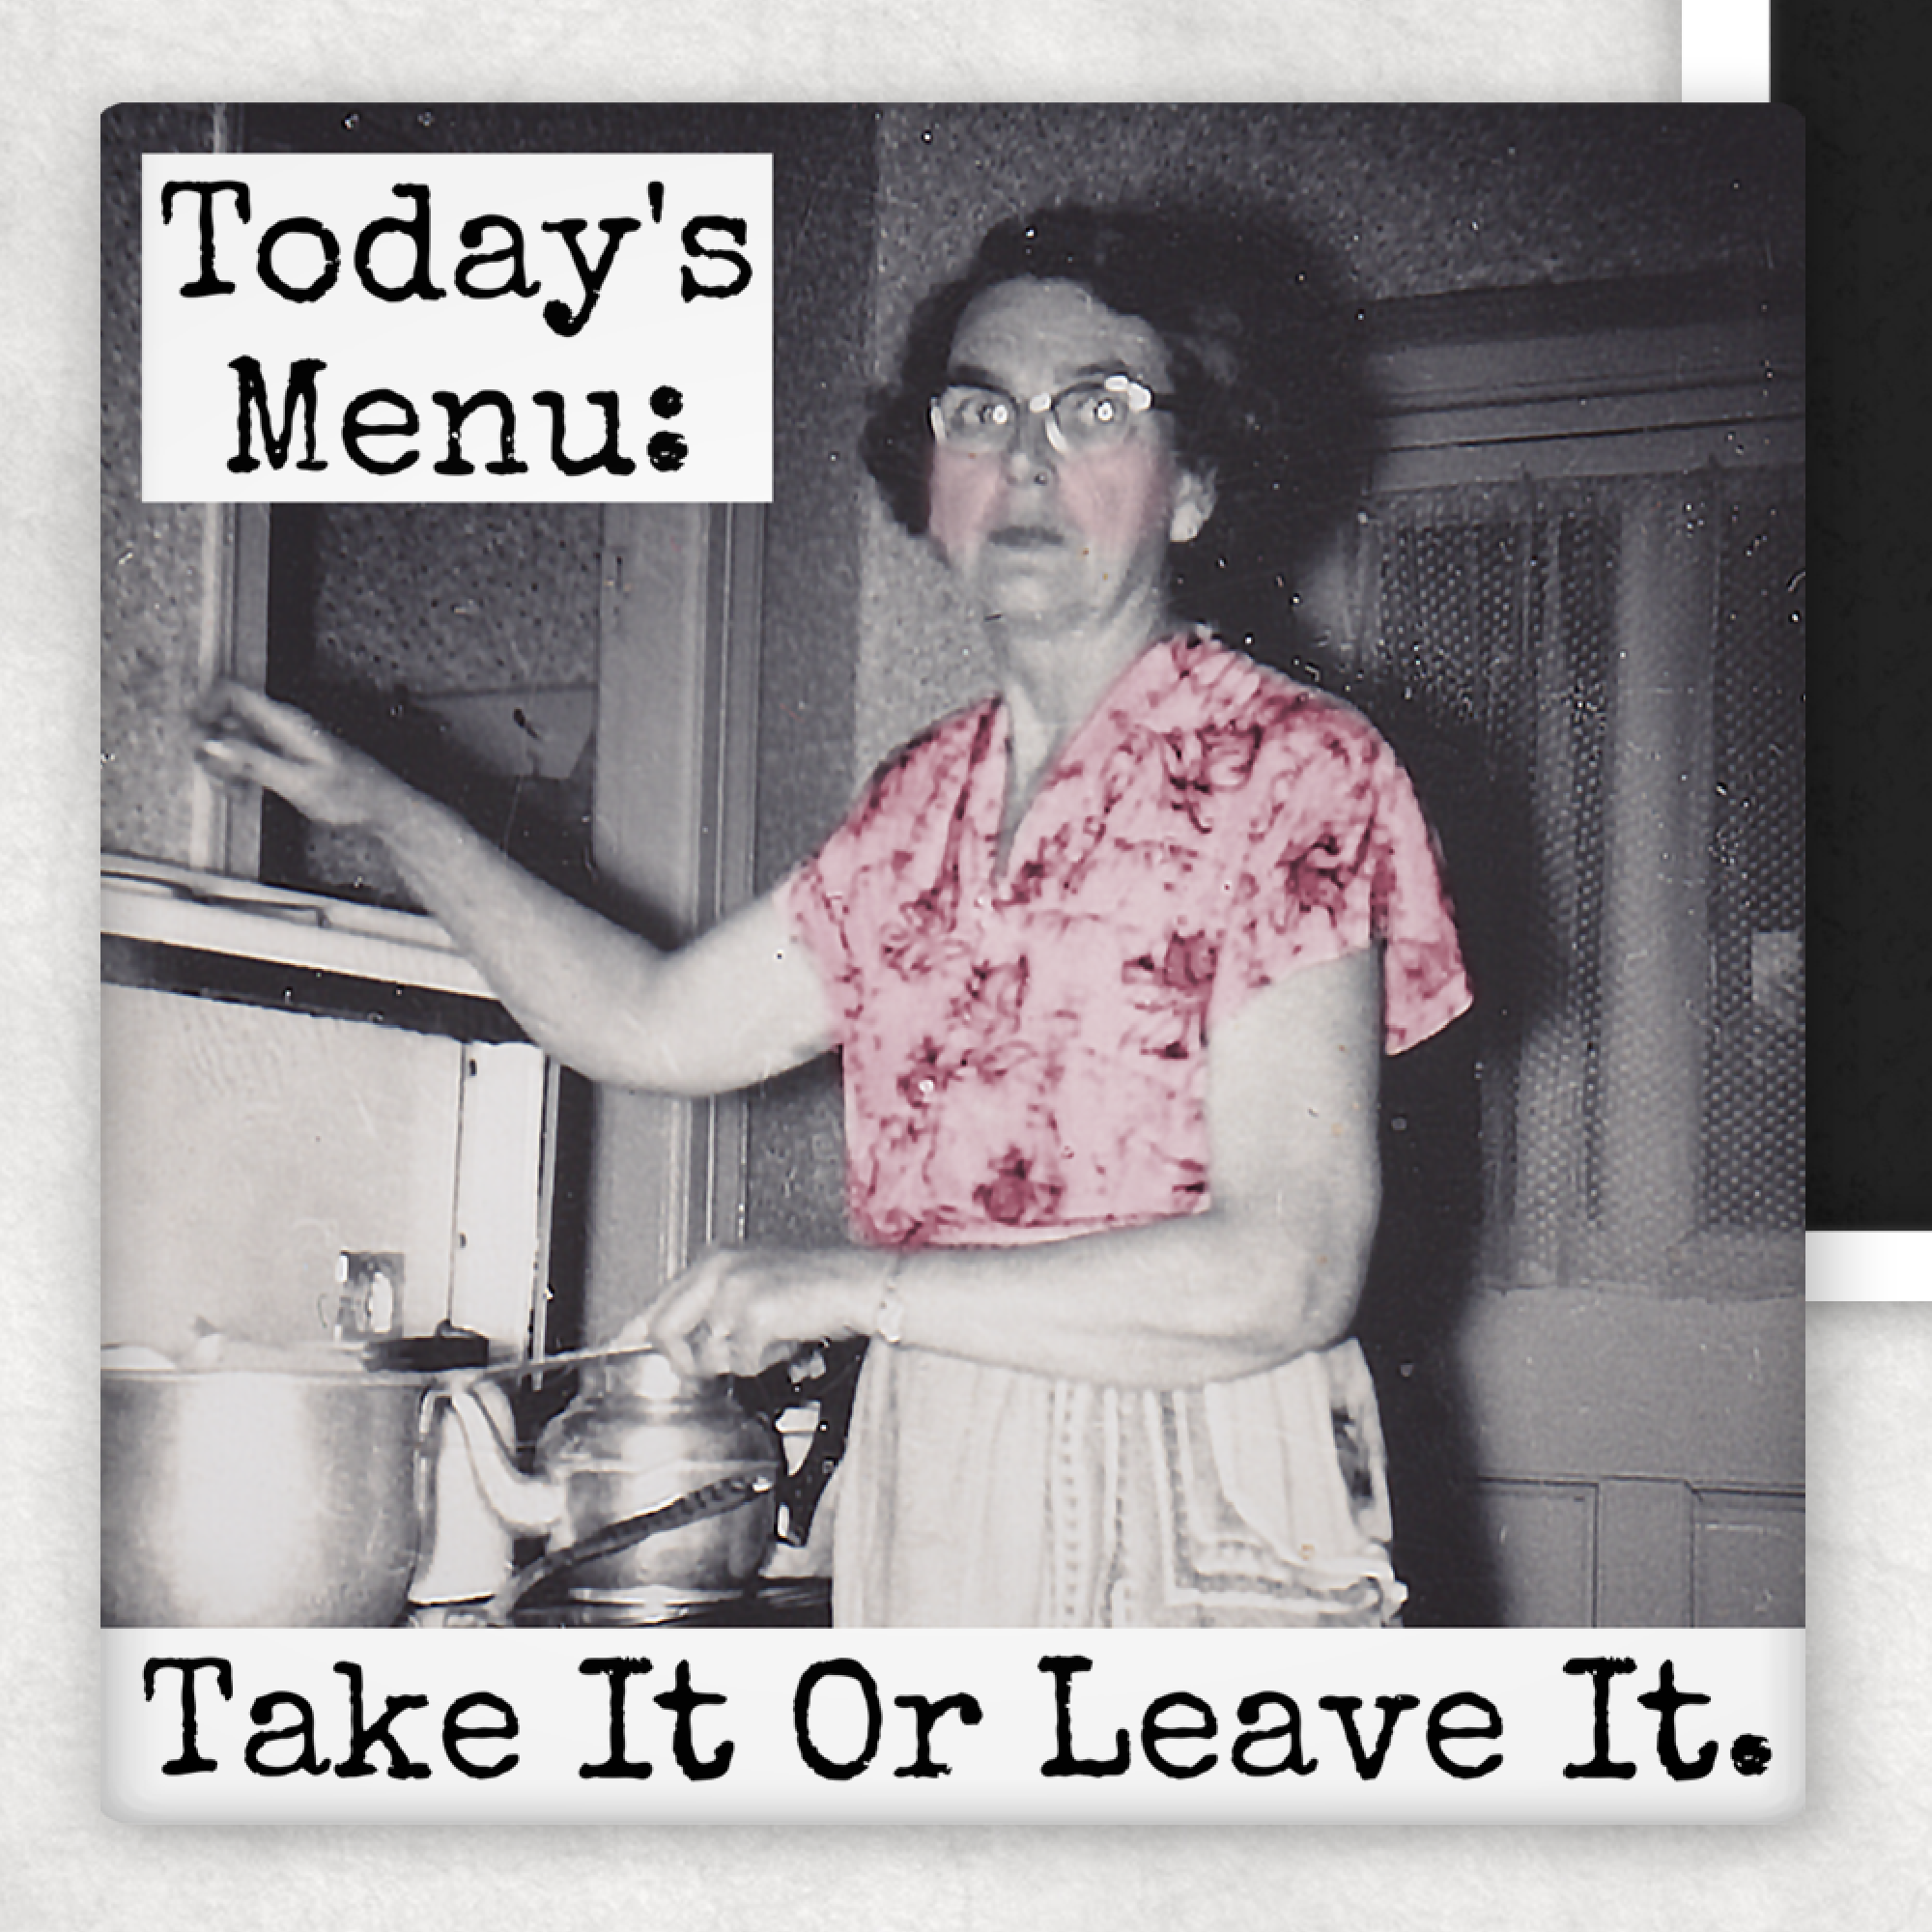 Funny Magnet. Today's Menu: Take It or Leave It.